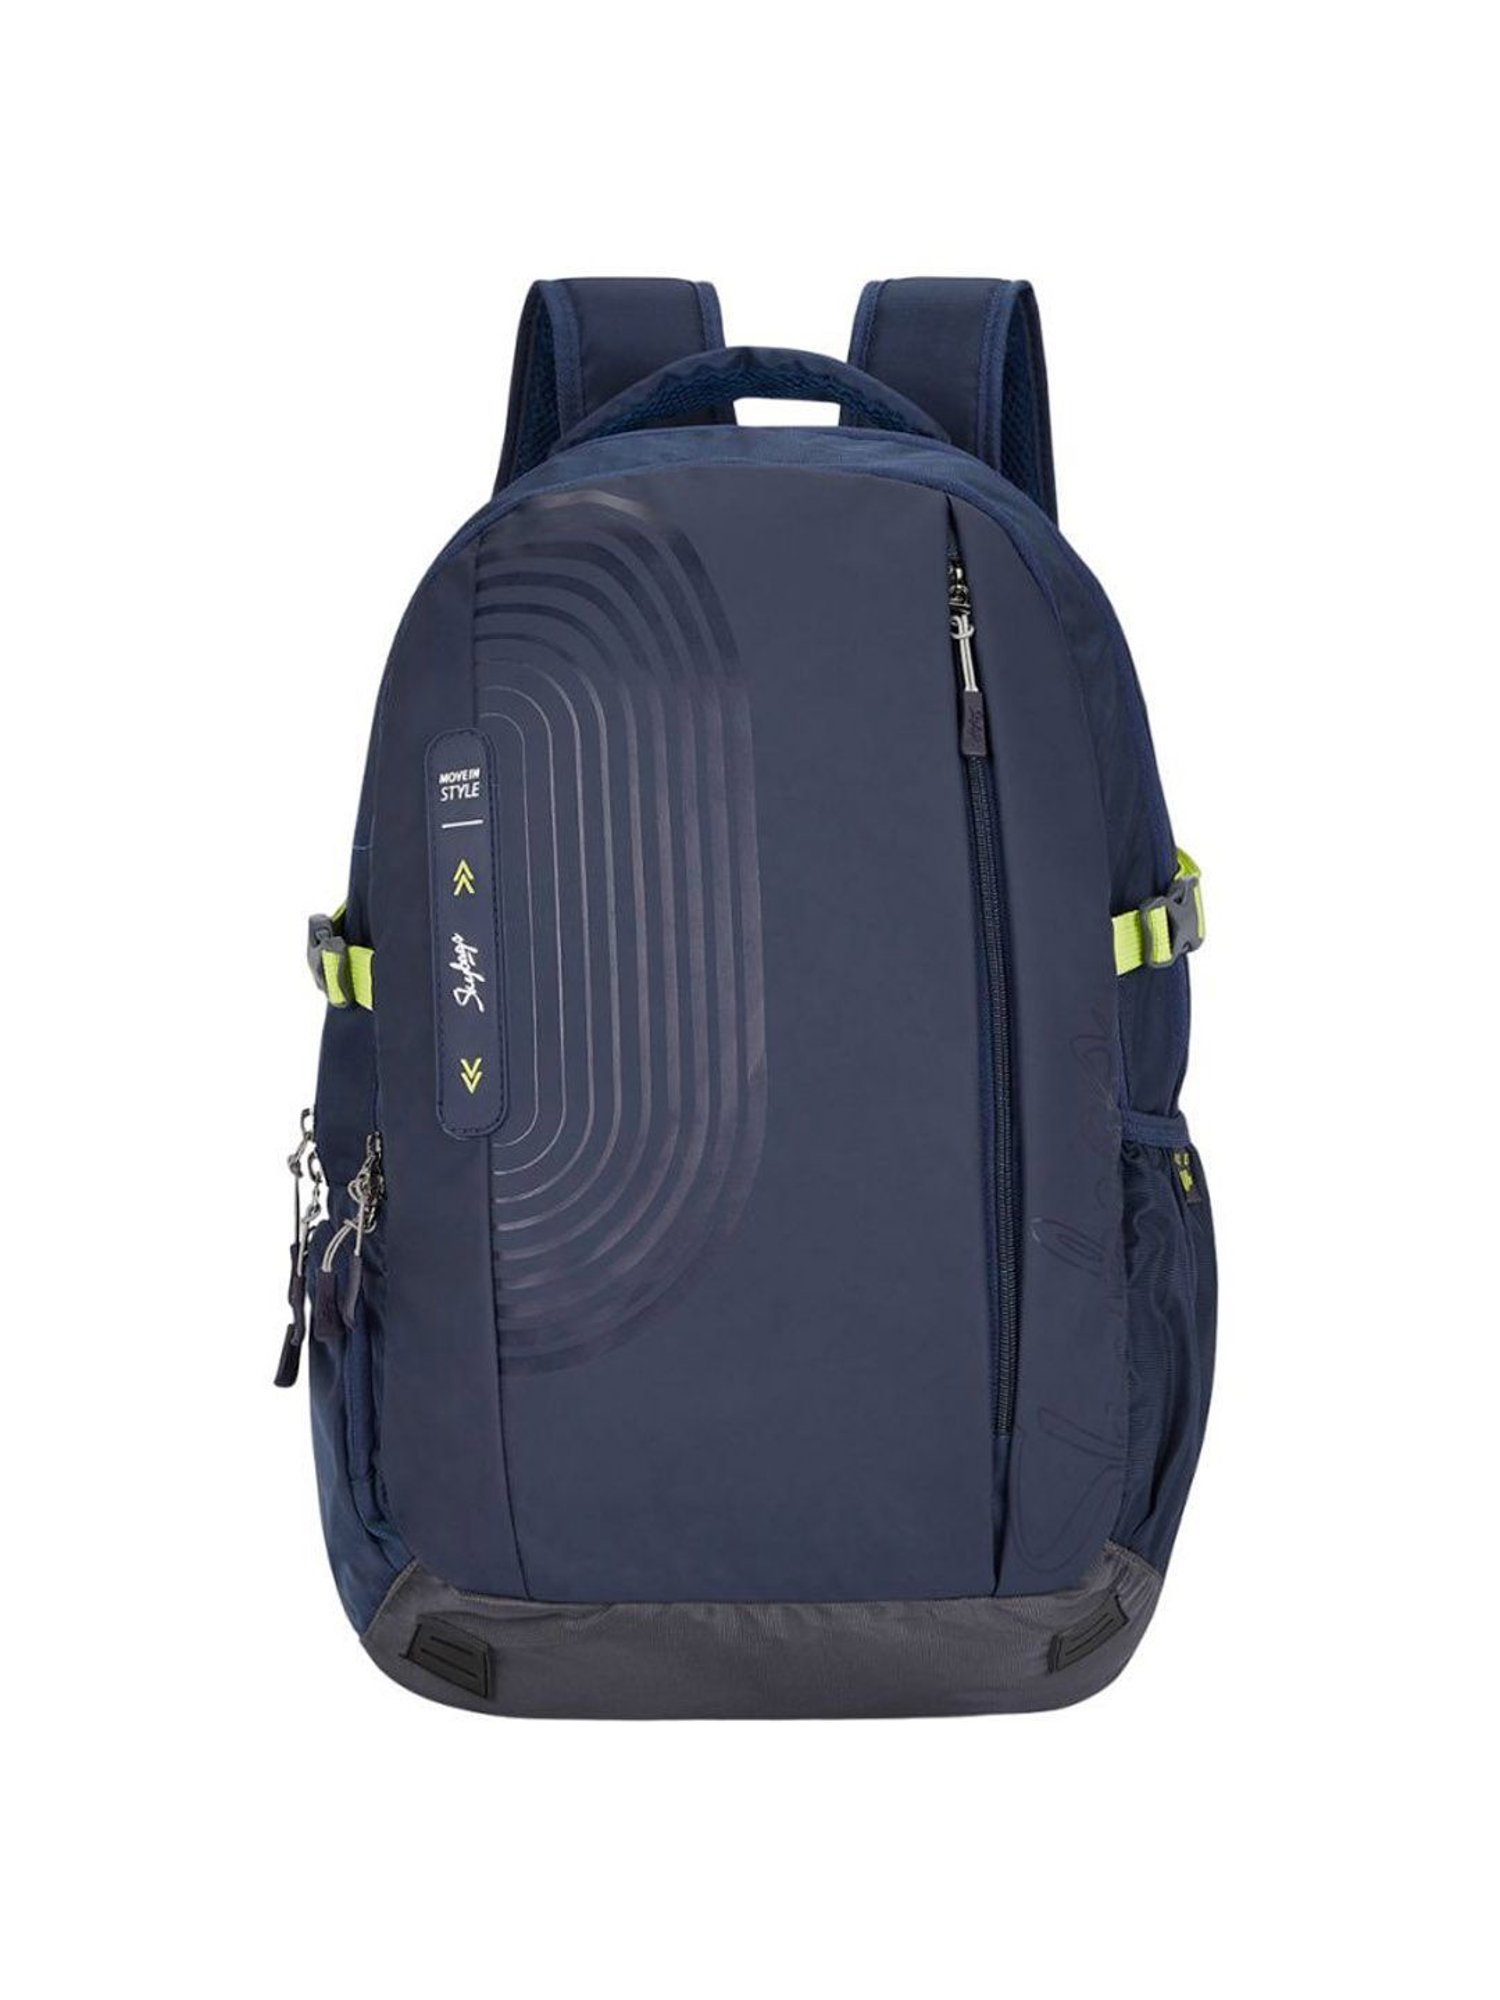 Buy Skybags XYLO PLUS 02 LAPTOP BACKPACK (H) NAVY at Amazon.in